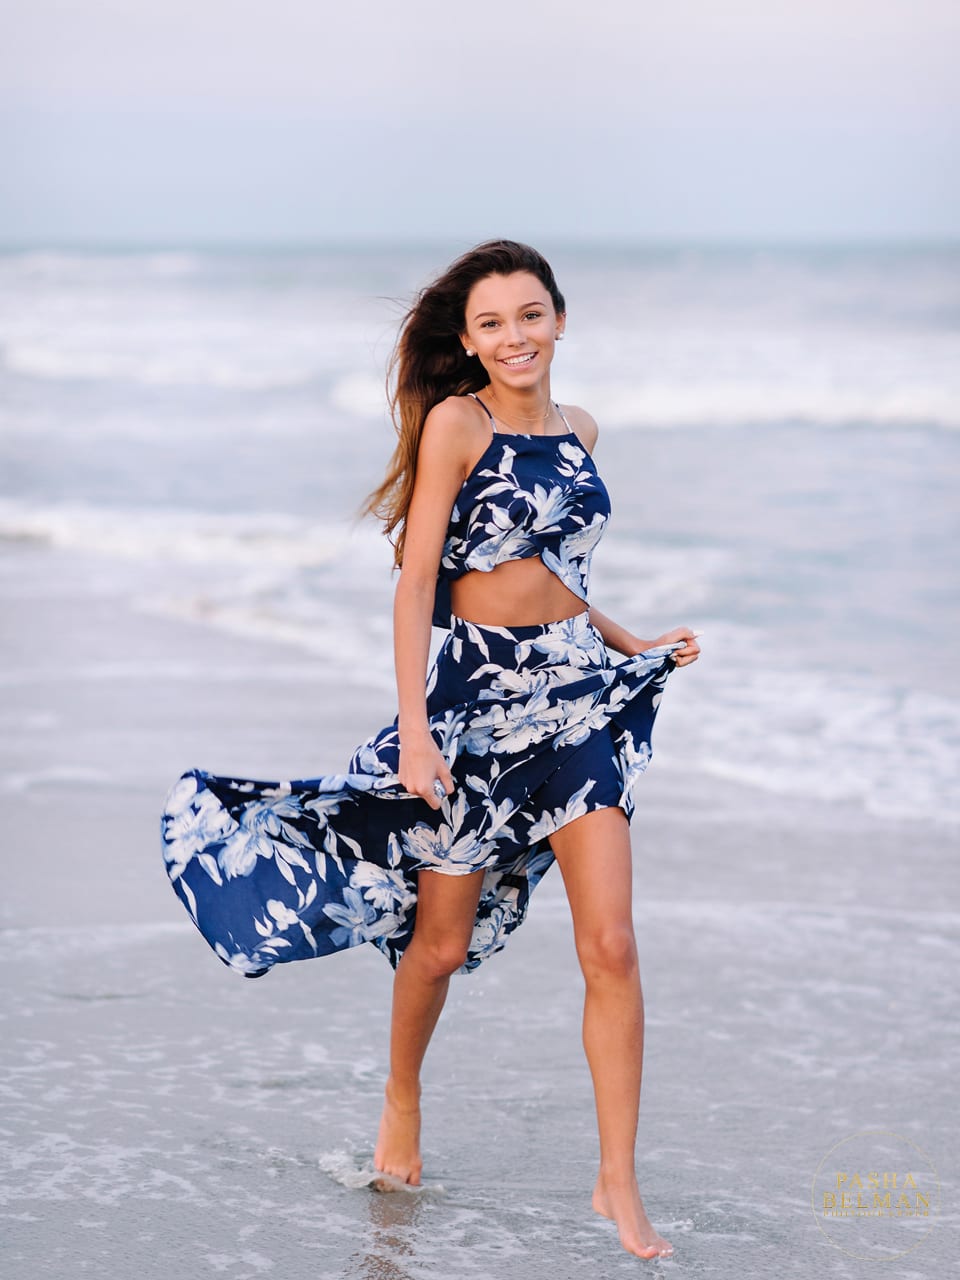 Charleston West Virginia High School Senior at the Beach in South Carolina during senior pictures by Pasha Belman